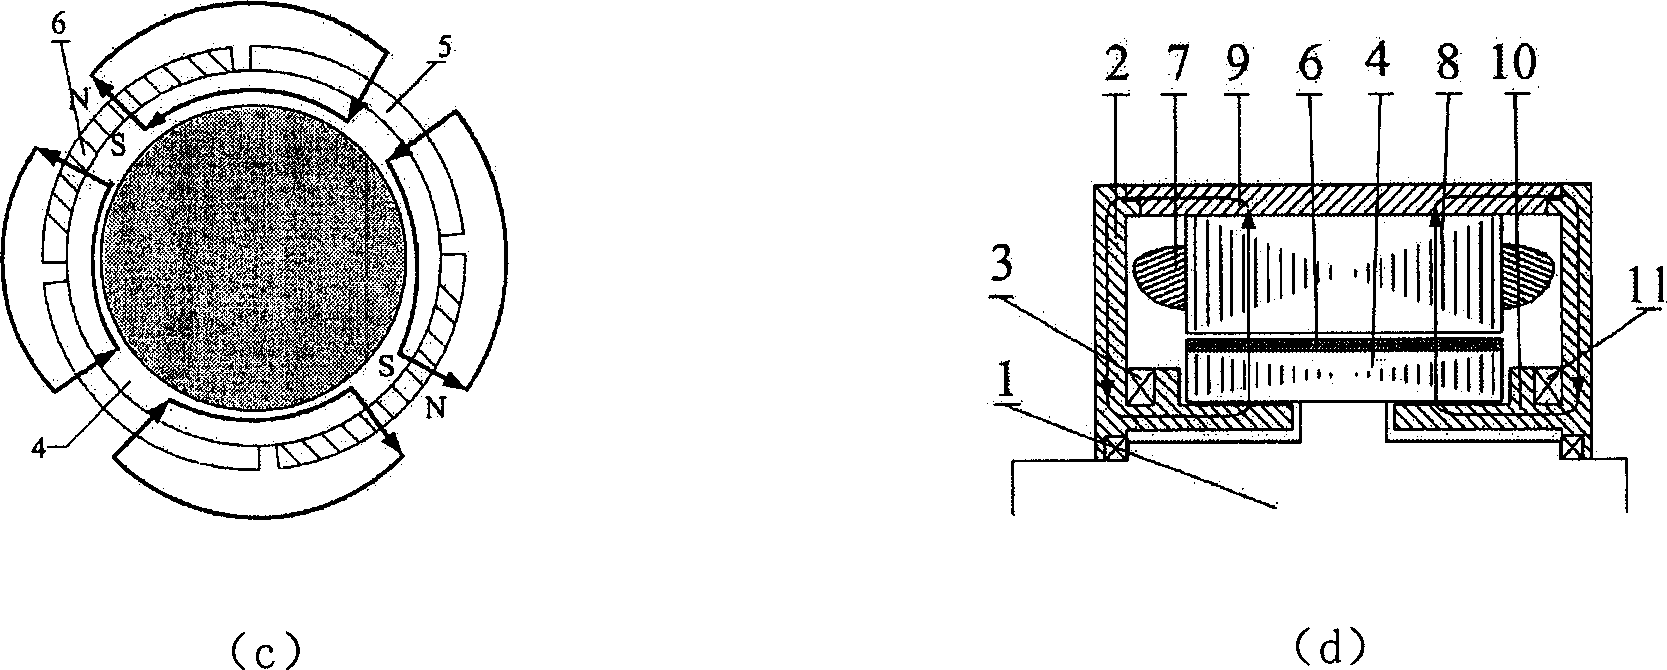 Bypass mixed excitation electrical motor